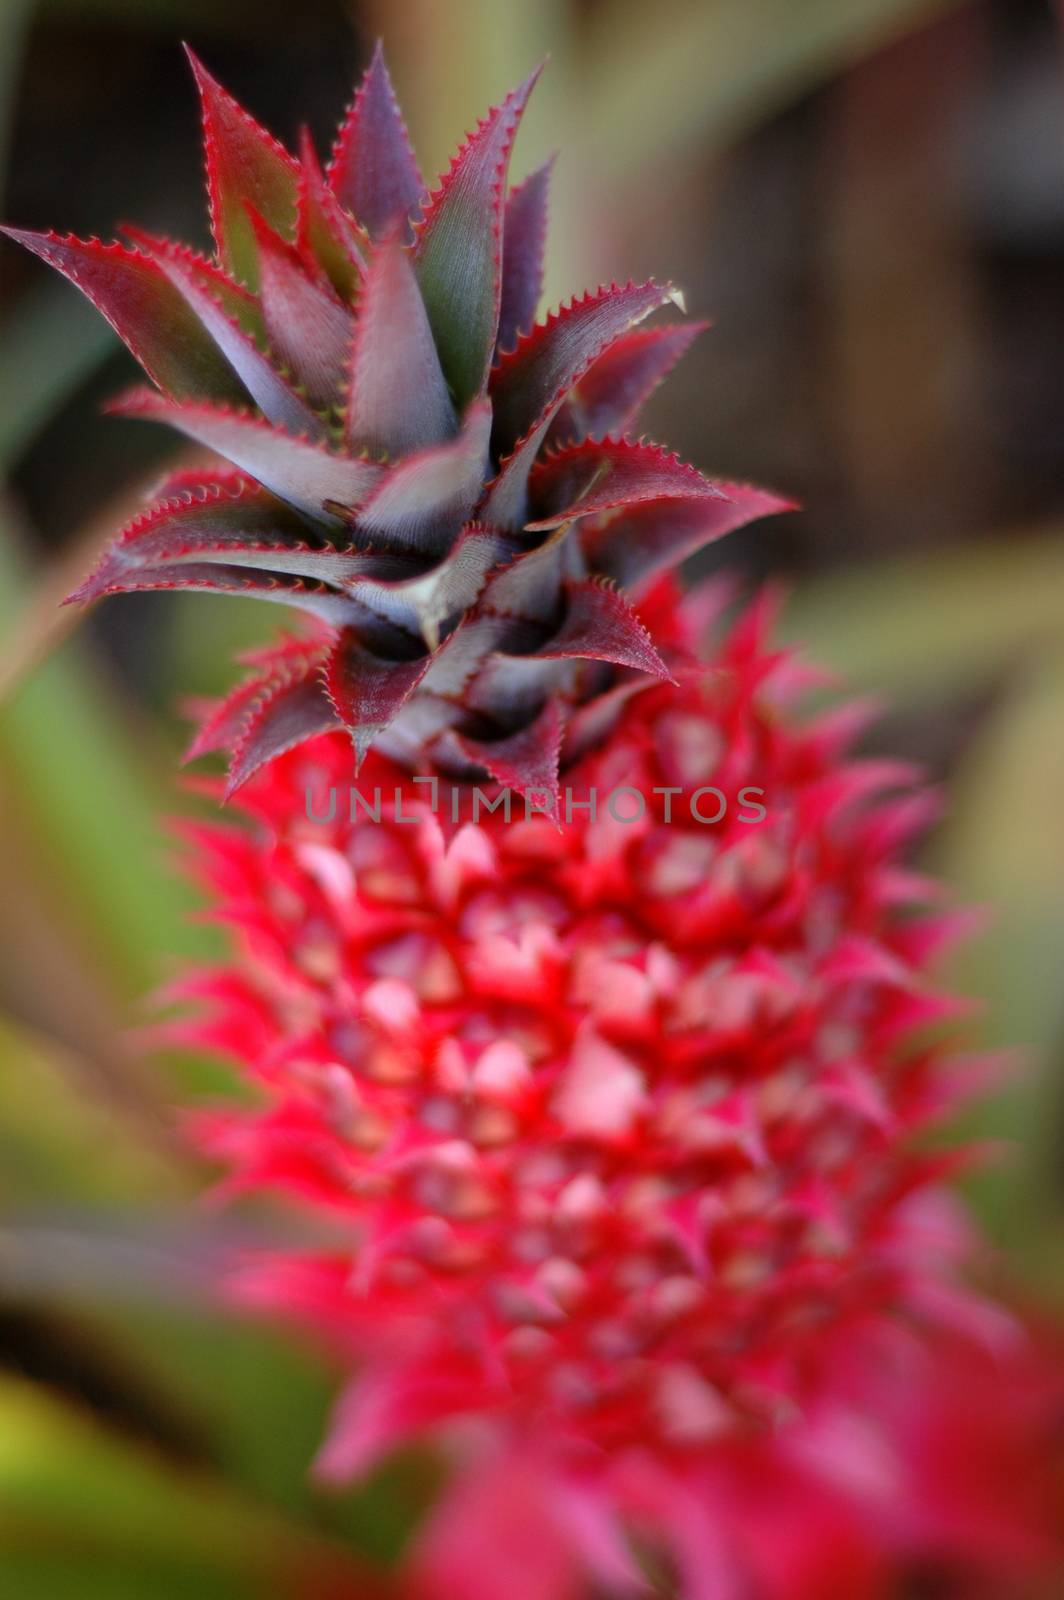 A Red Pineapple In Hawaii With Shallow Depth Of Focus